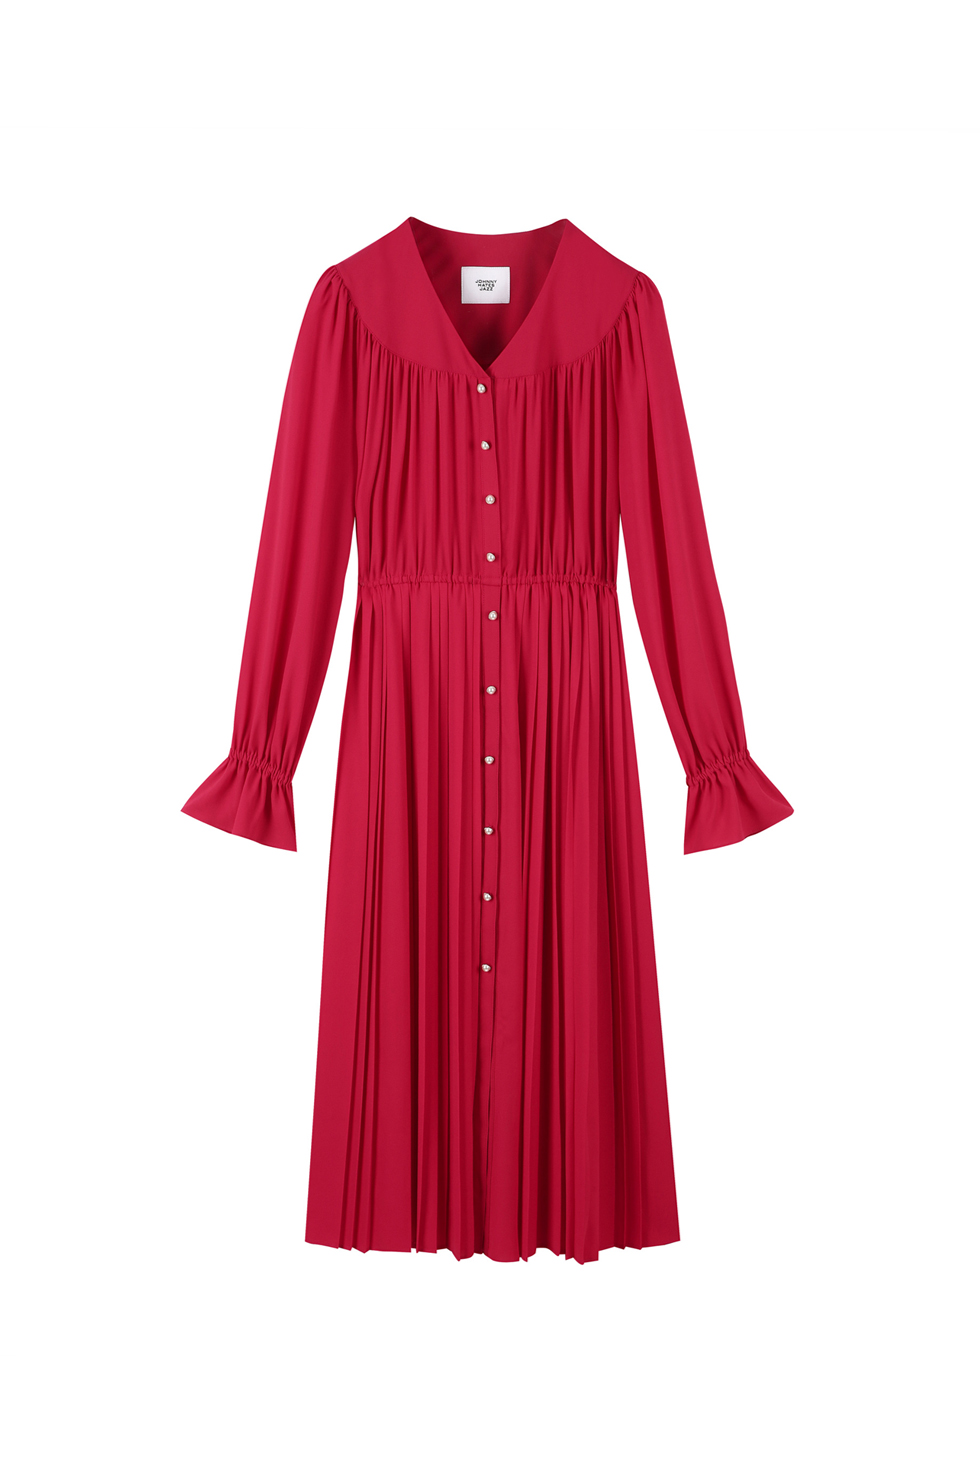 PEARL BUTTON PLEATS DRESS - RED